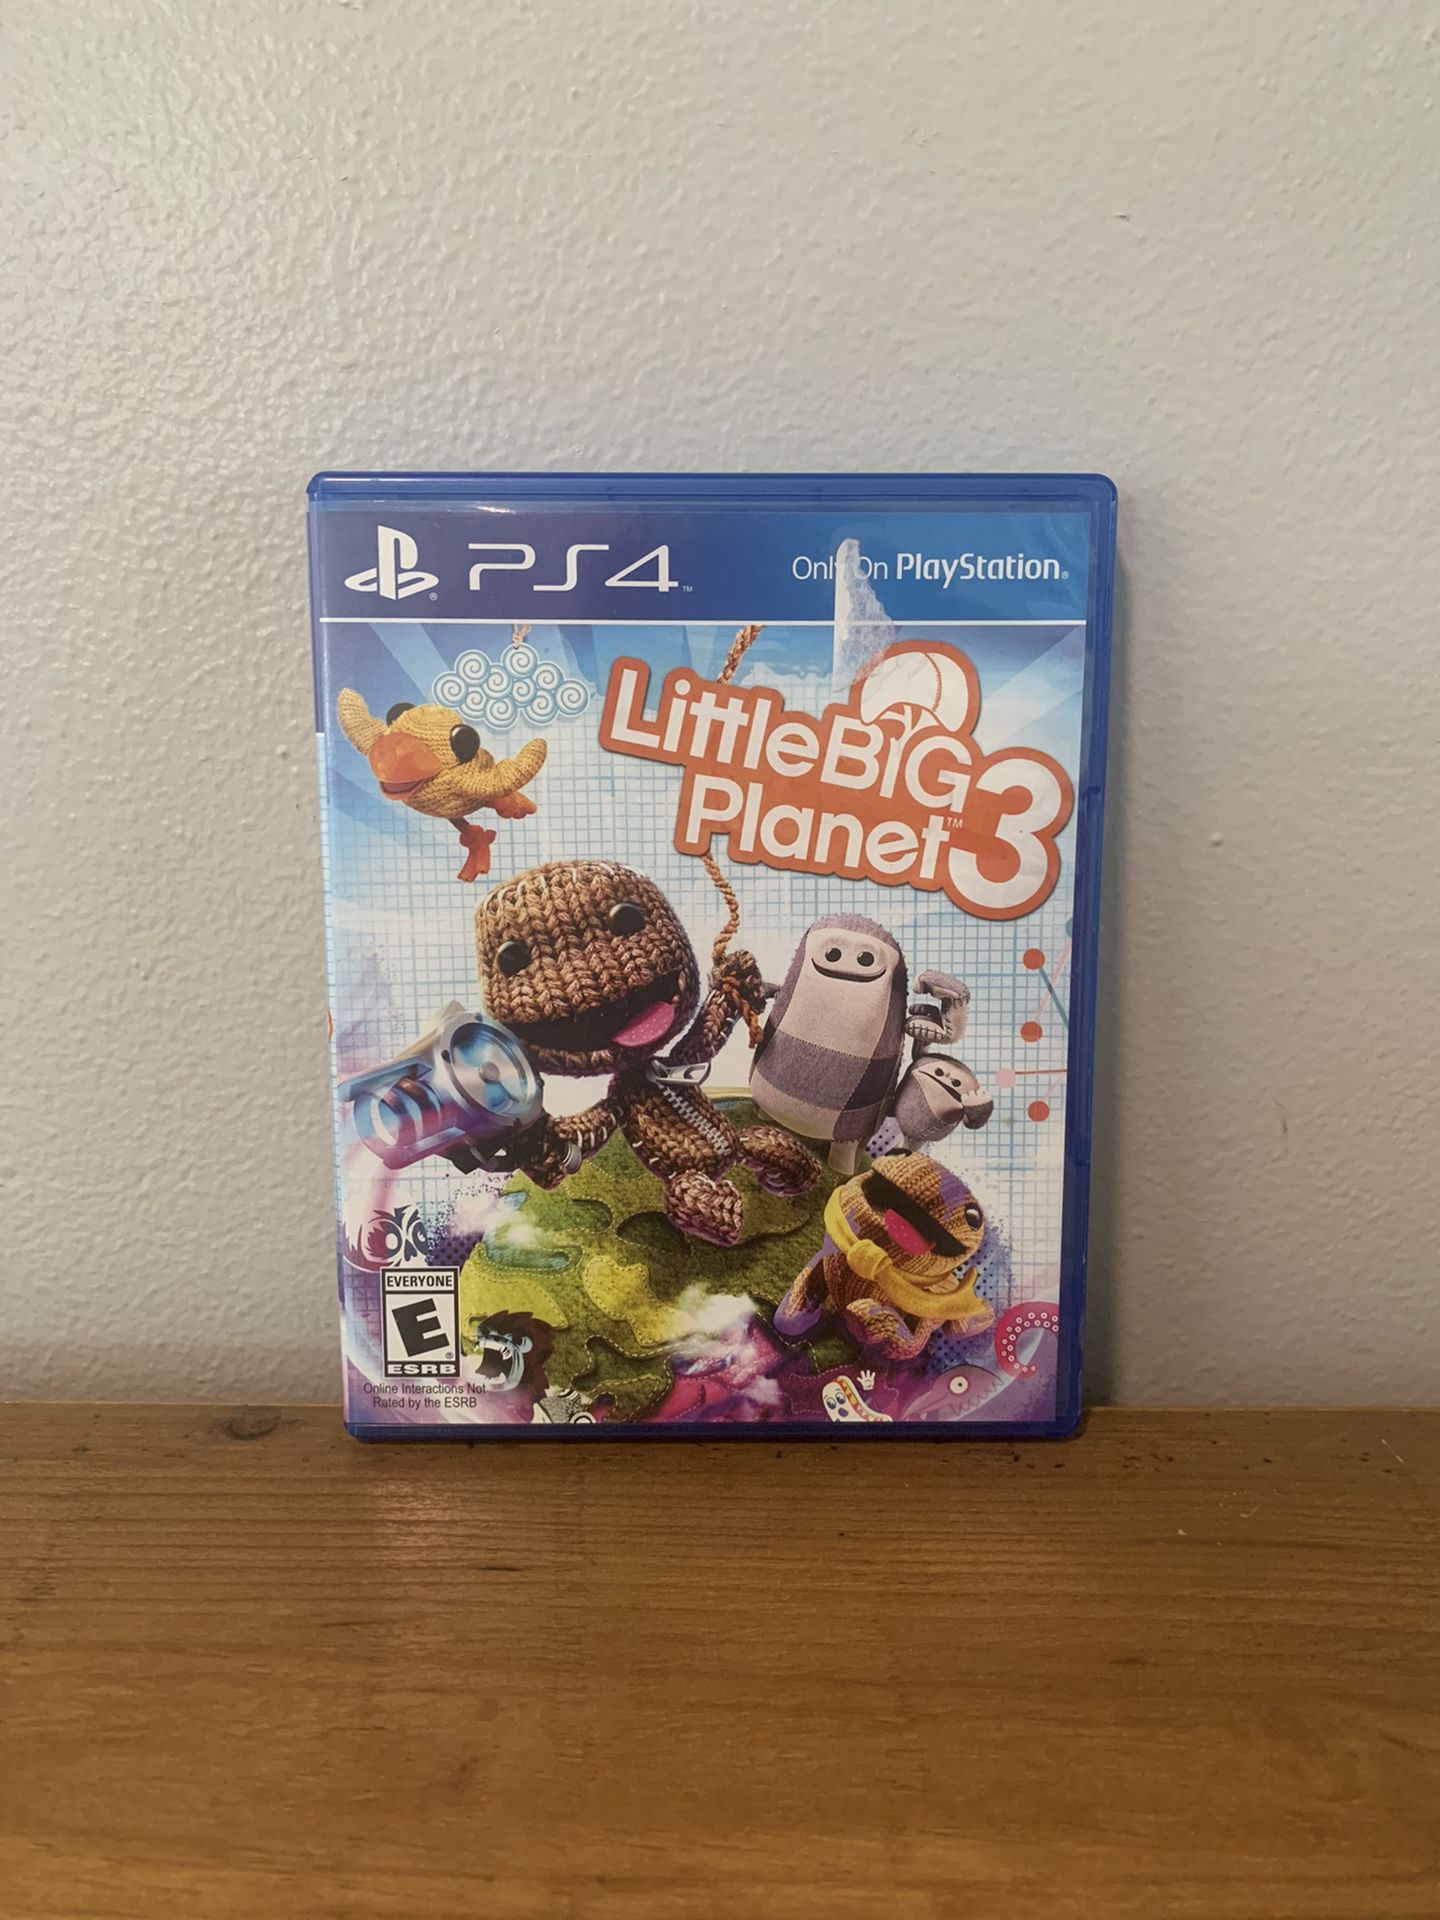 suffix Beregn Besætte Little Big Planet 3 - PS4 - PlayStation 4 - LittleBIGPlanet3 - PS Exclusive  for Sale in Portland, OR - OfferUp